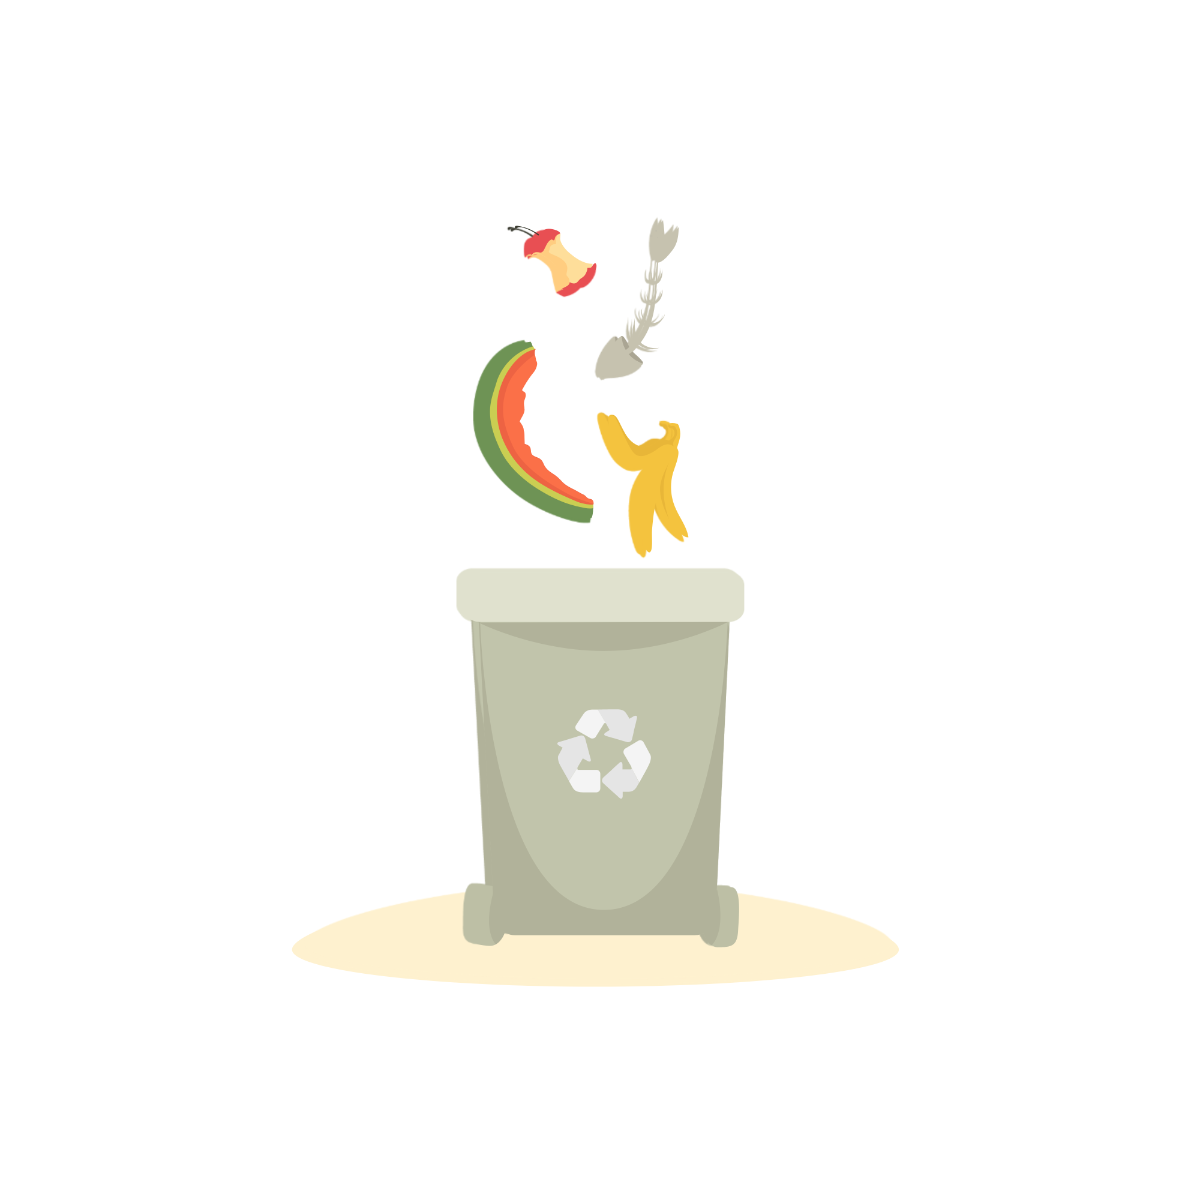 Recycle Waste Vector Template